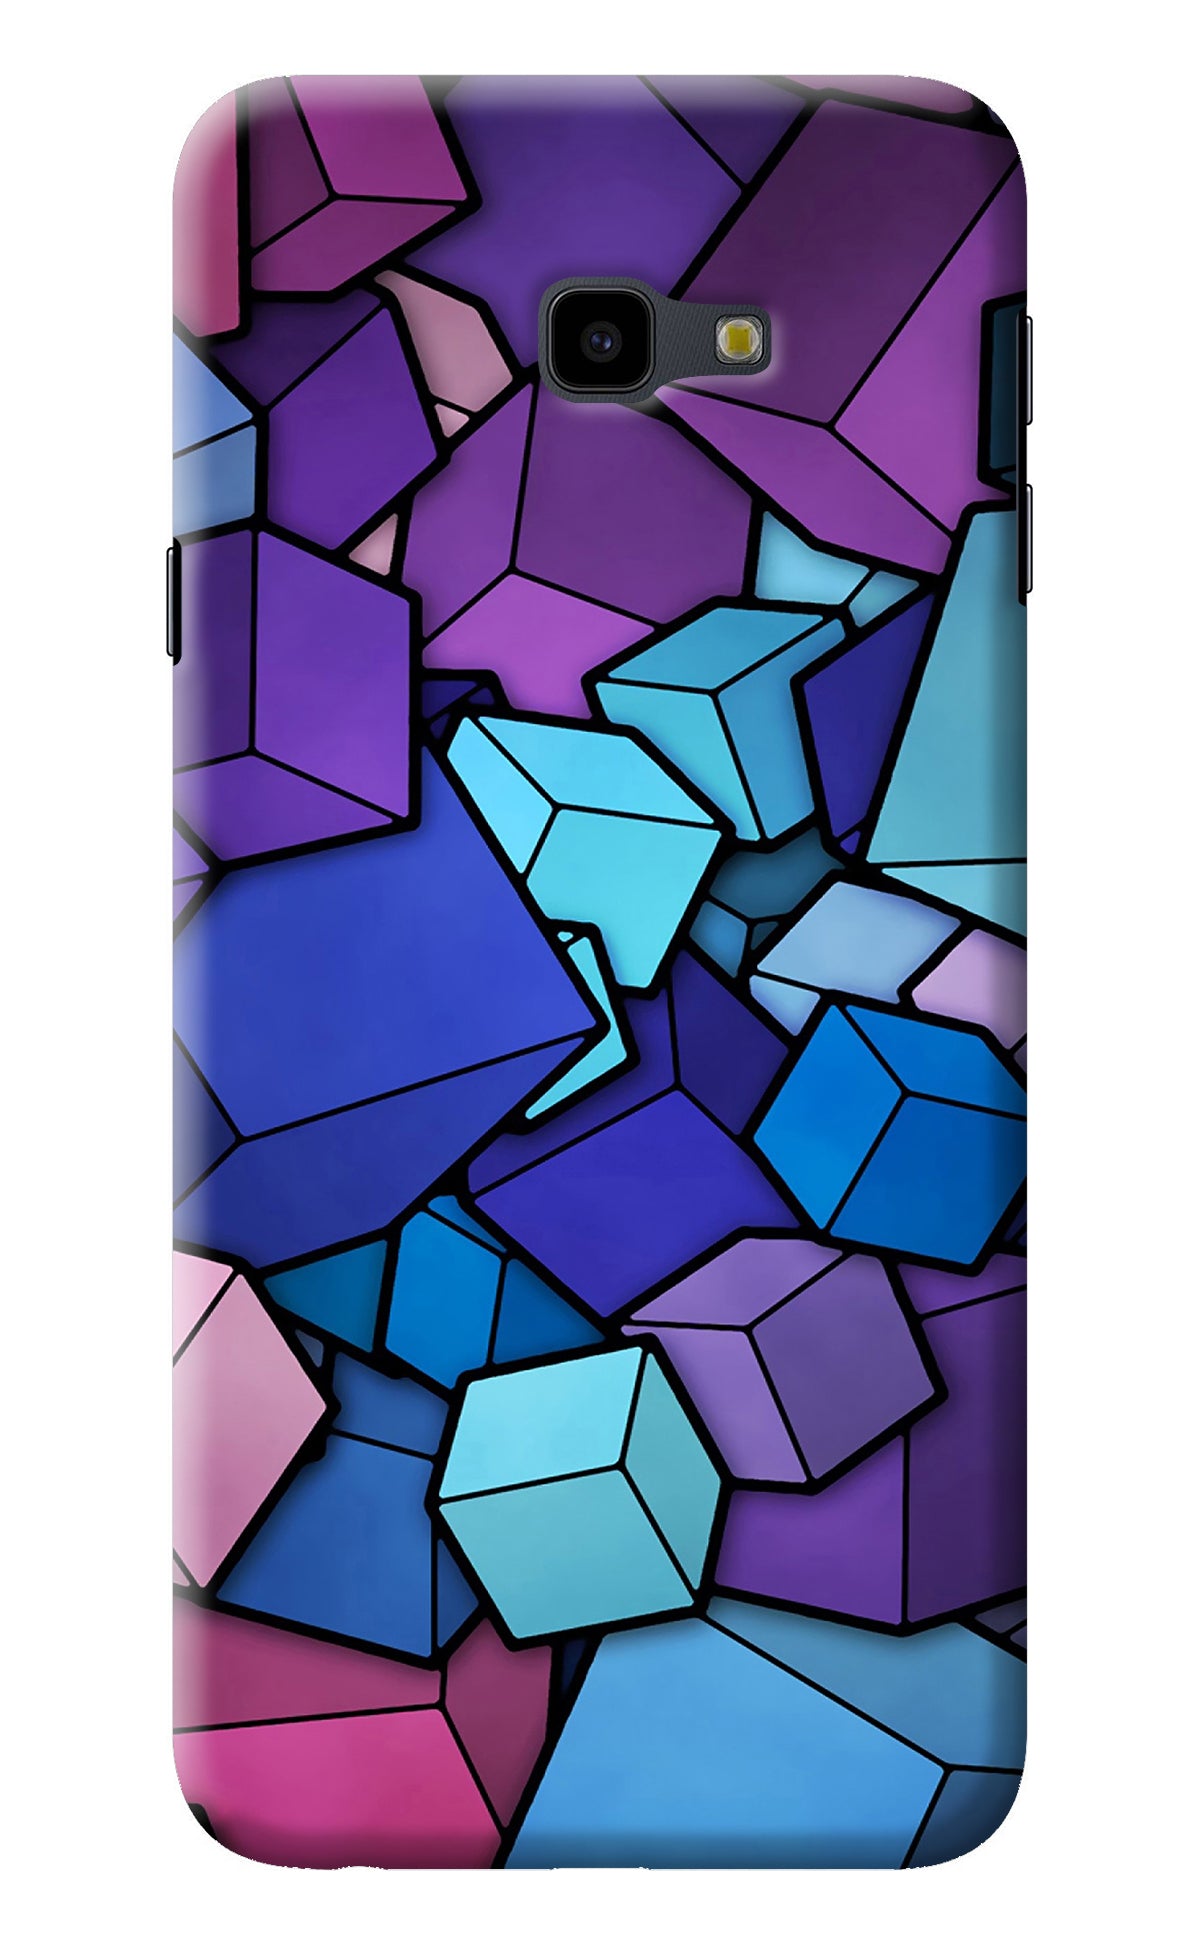 Cubic Abstract Samsung J4 Plus Back Cover